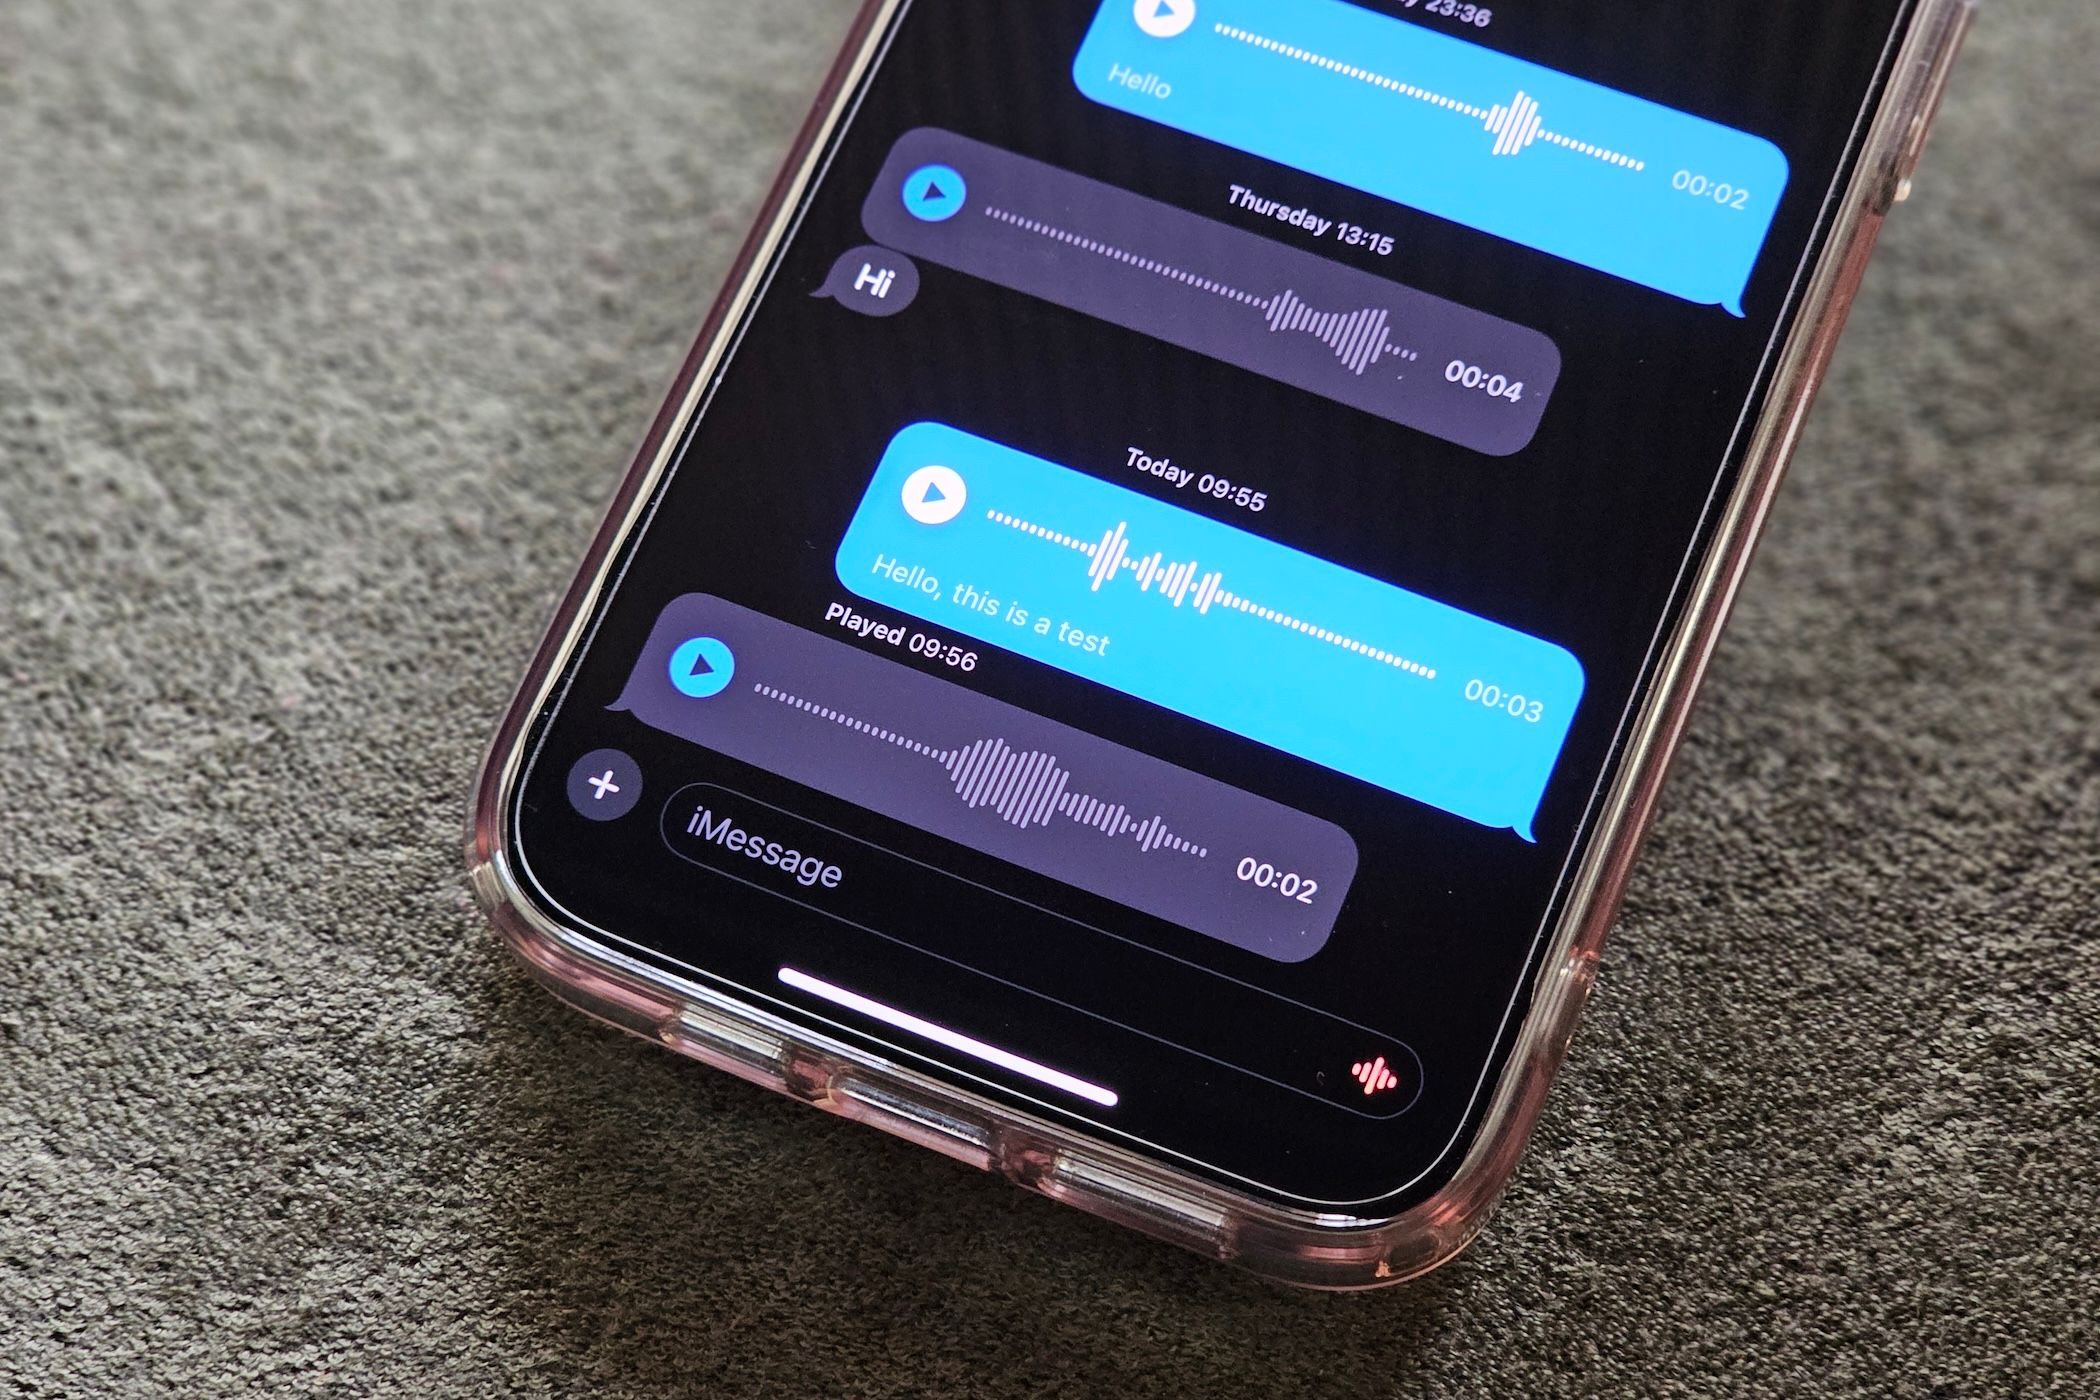 Sending and receiving voice messages on iPhone.